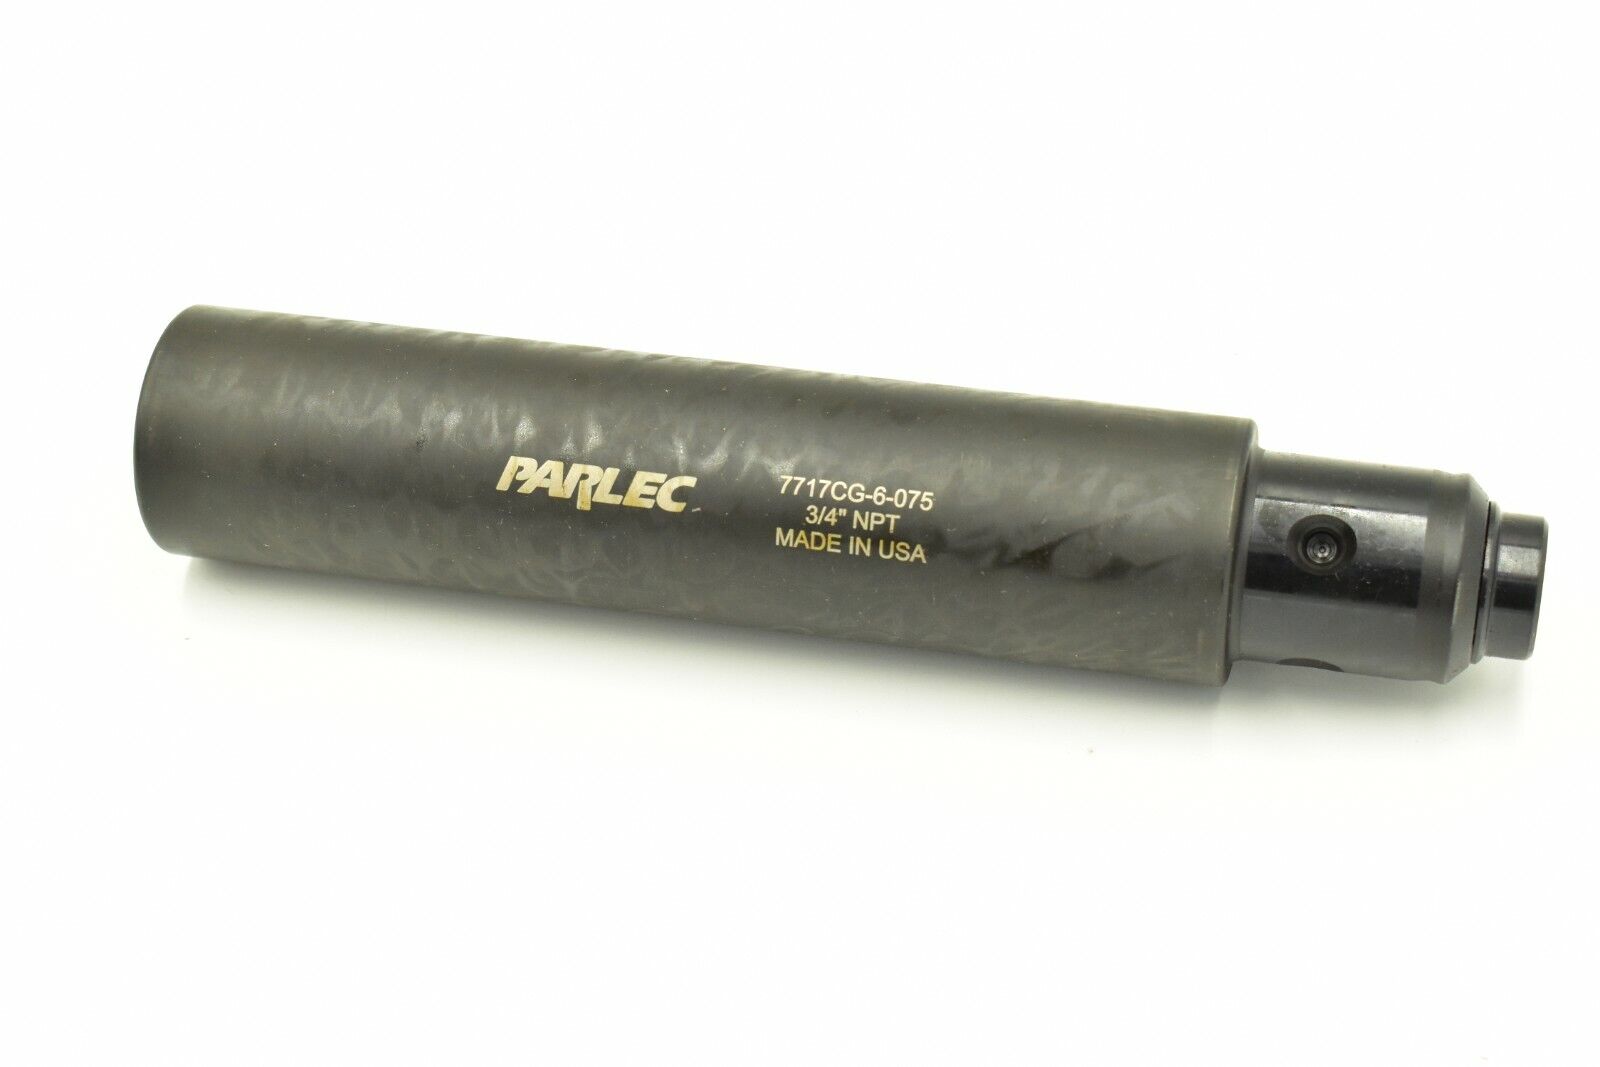 Parlec 7717cg-6-075 Numertap 770 6" Extended Coolant Through Tap Adapter 3/4npt